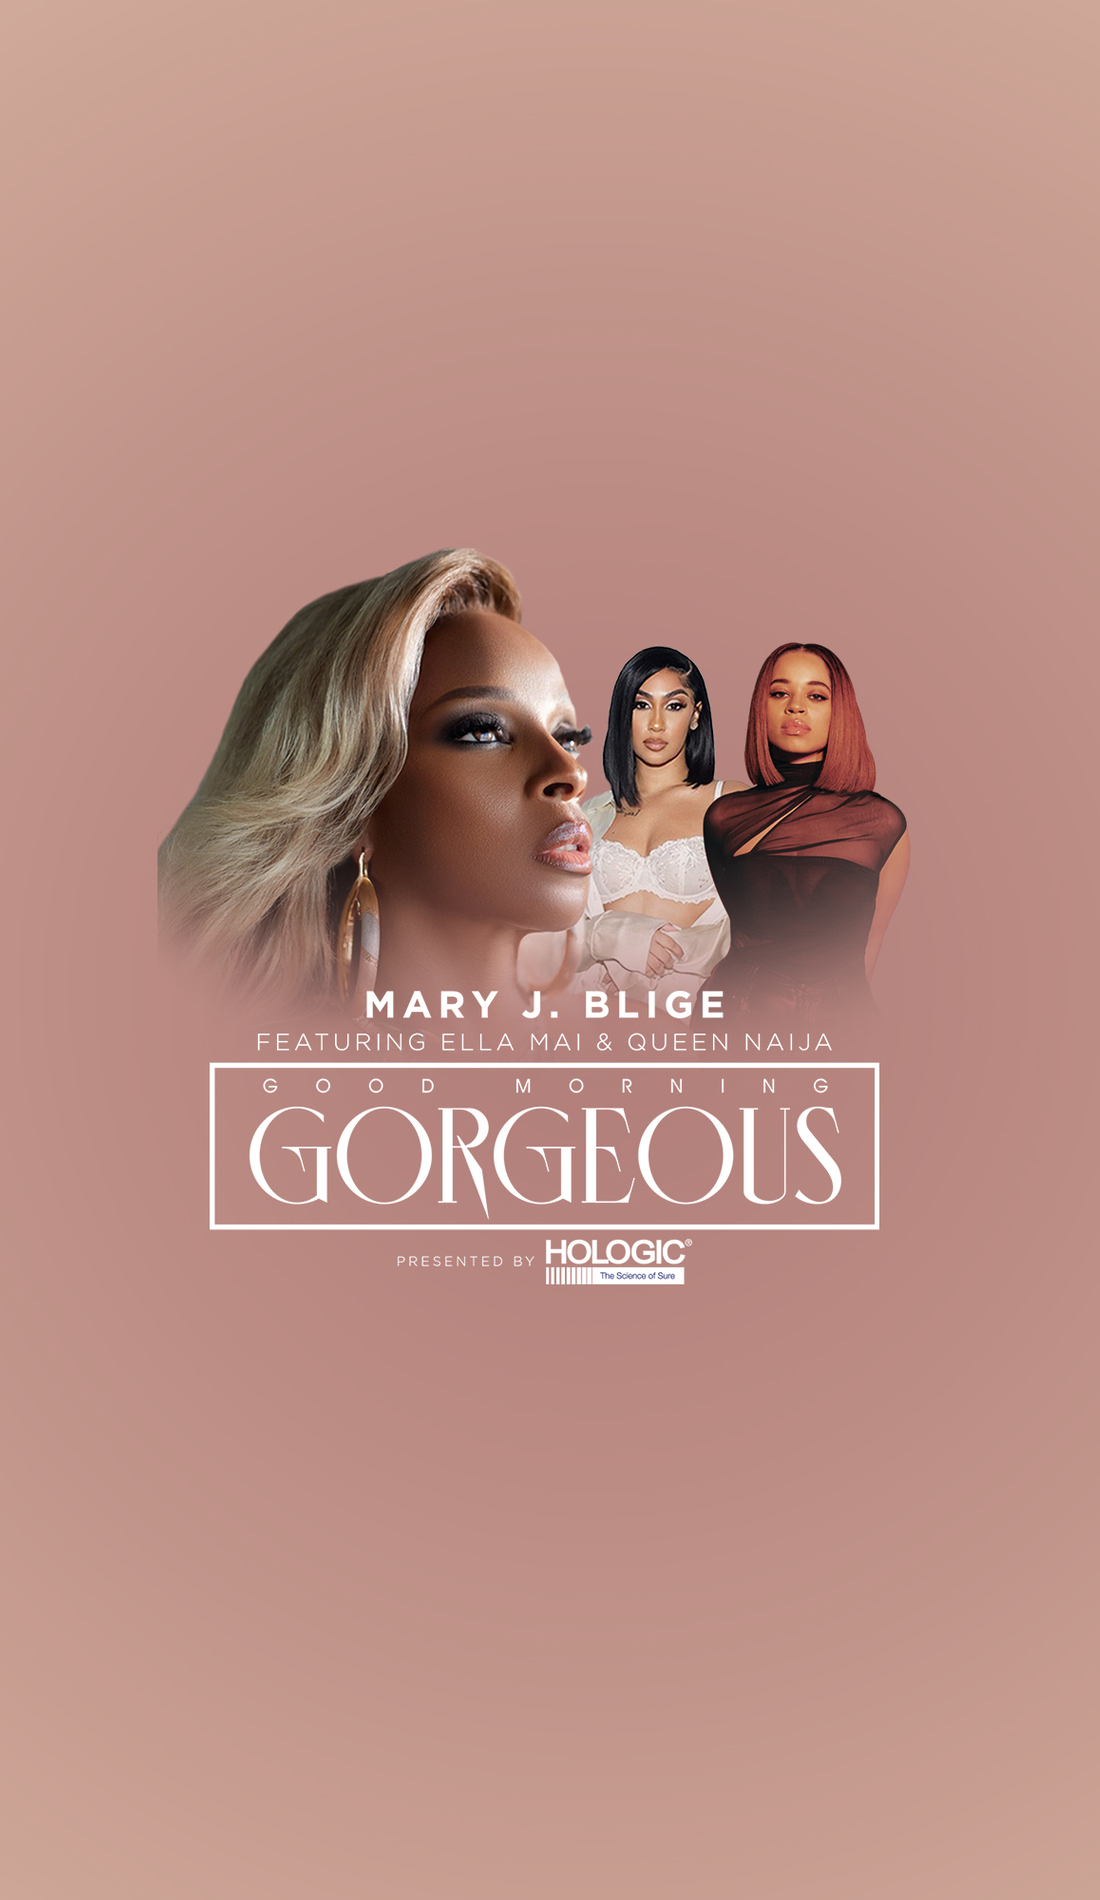 A Mary J. Blige live event